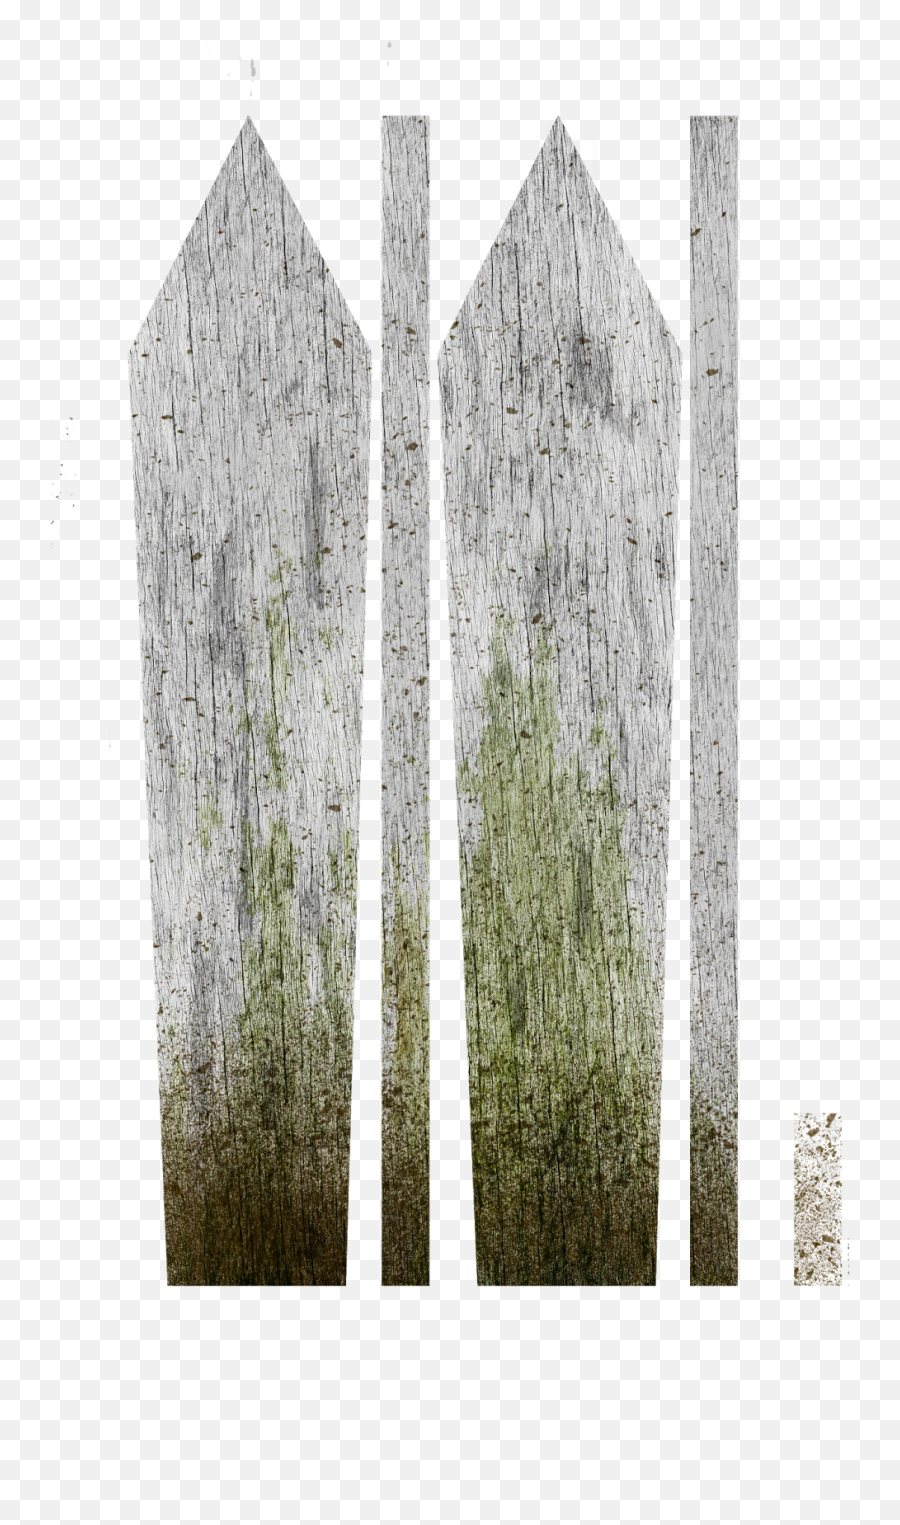 Fence Texture Png - Vertical,Fence Texture Png